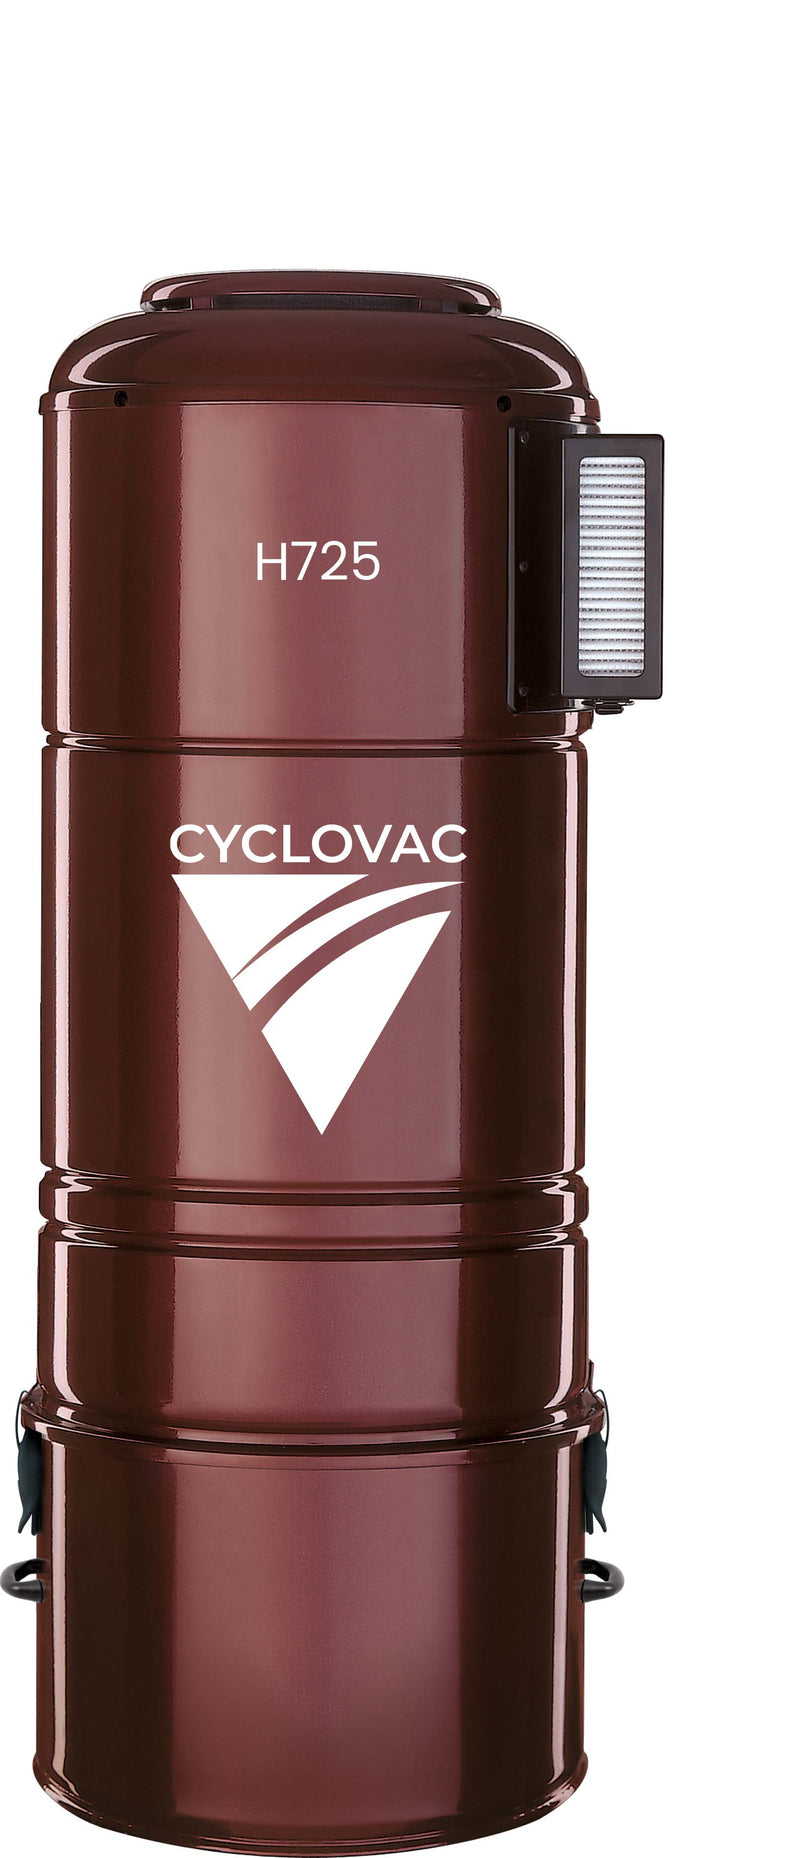 Cyclovac H725 with 2 Retraflex retractable hose inlets including attachments and the installation kit - Super Vacs